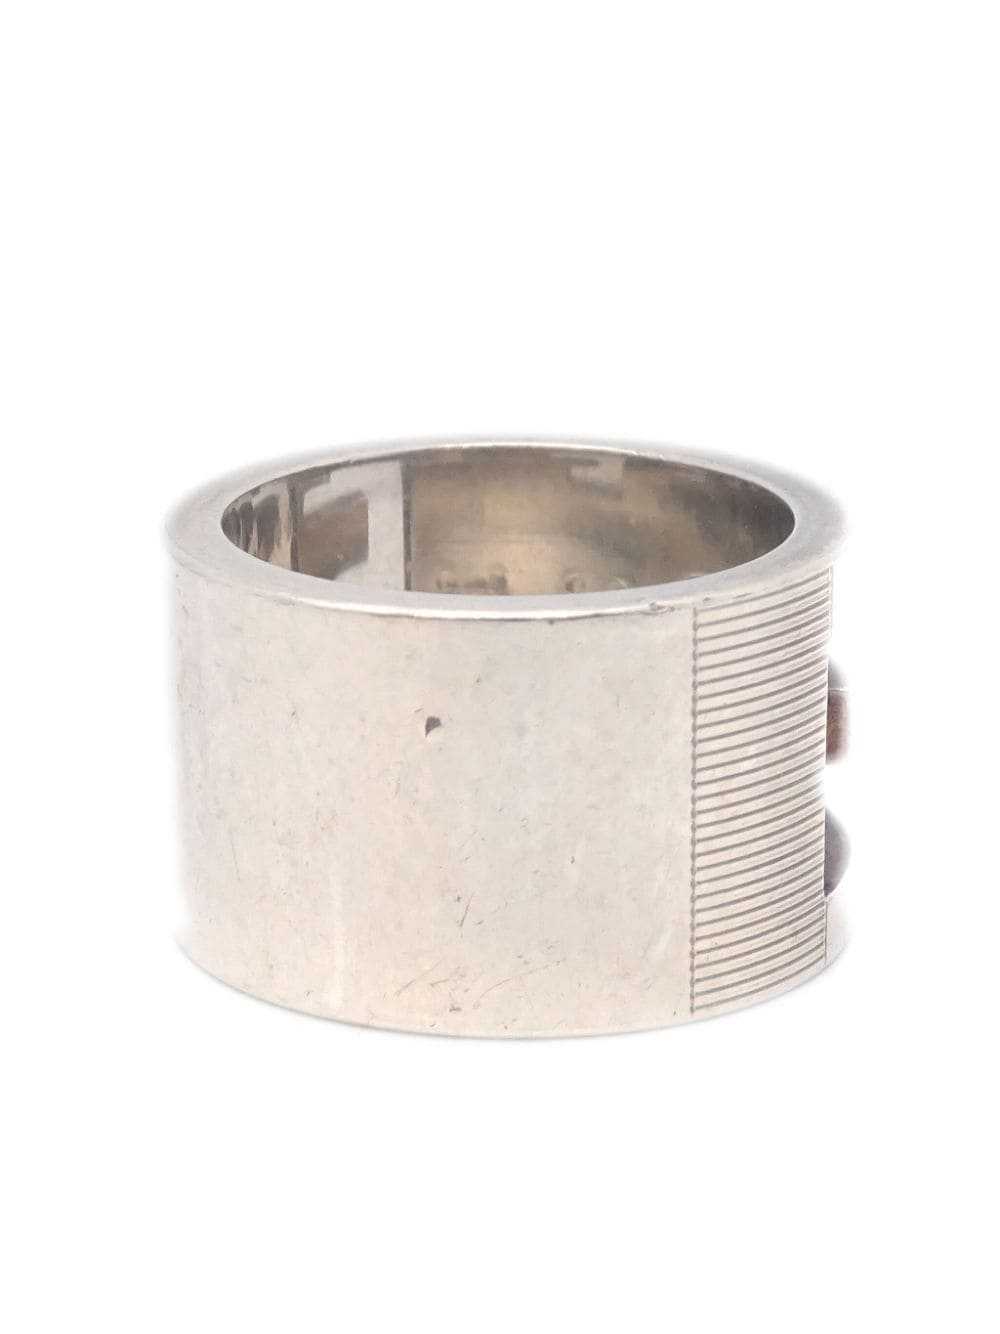 Gucci Pre-Owned 1990-2000 G logo ring - Silver - image 2